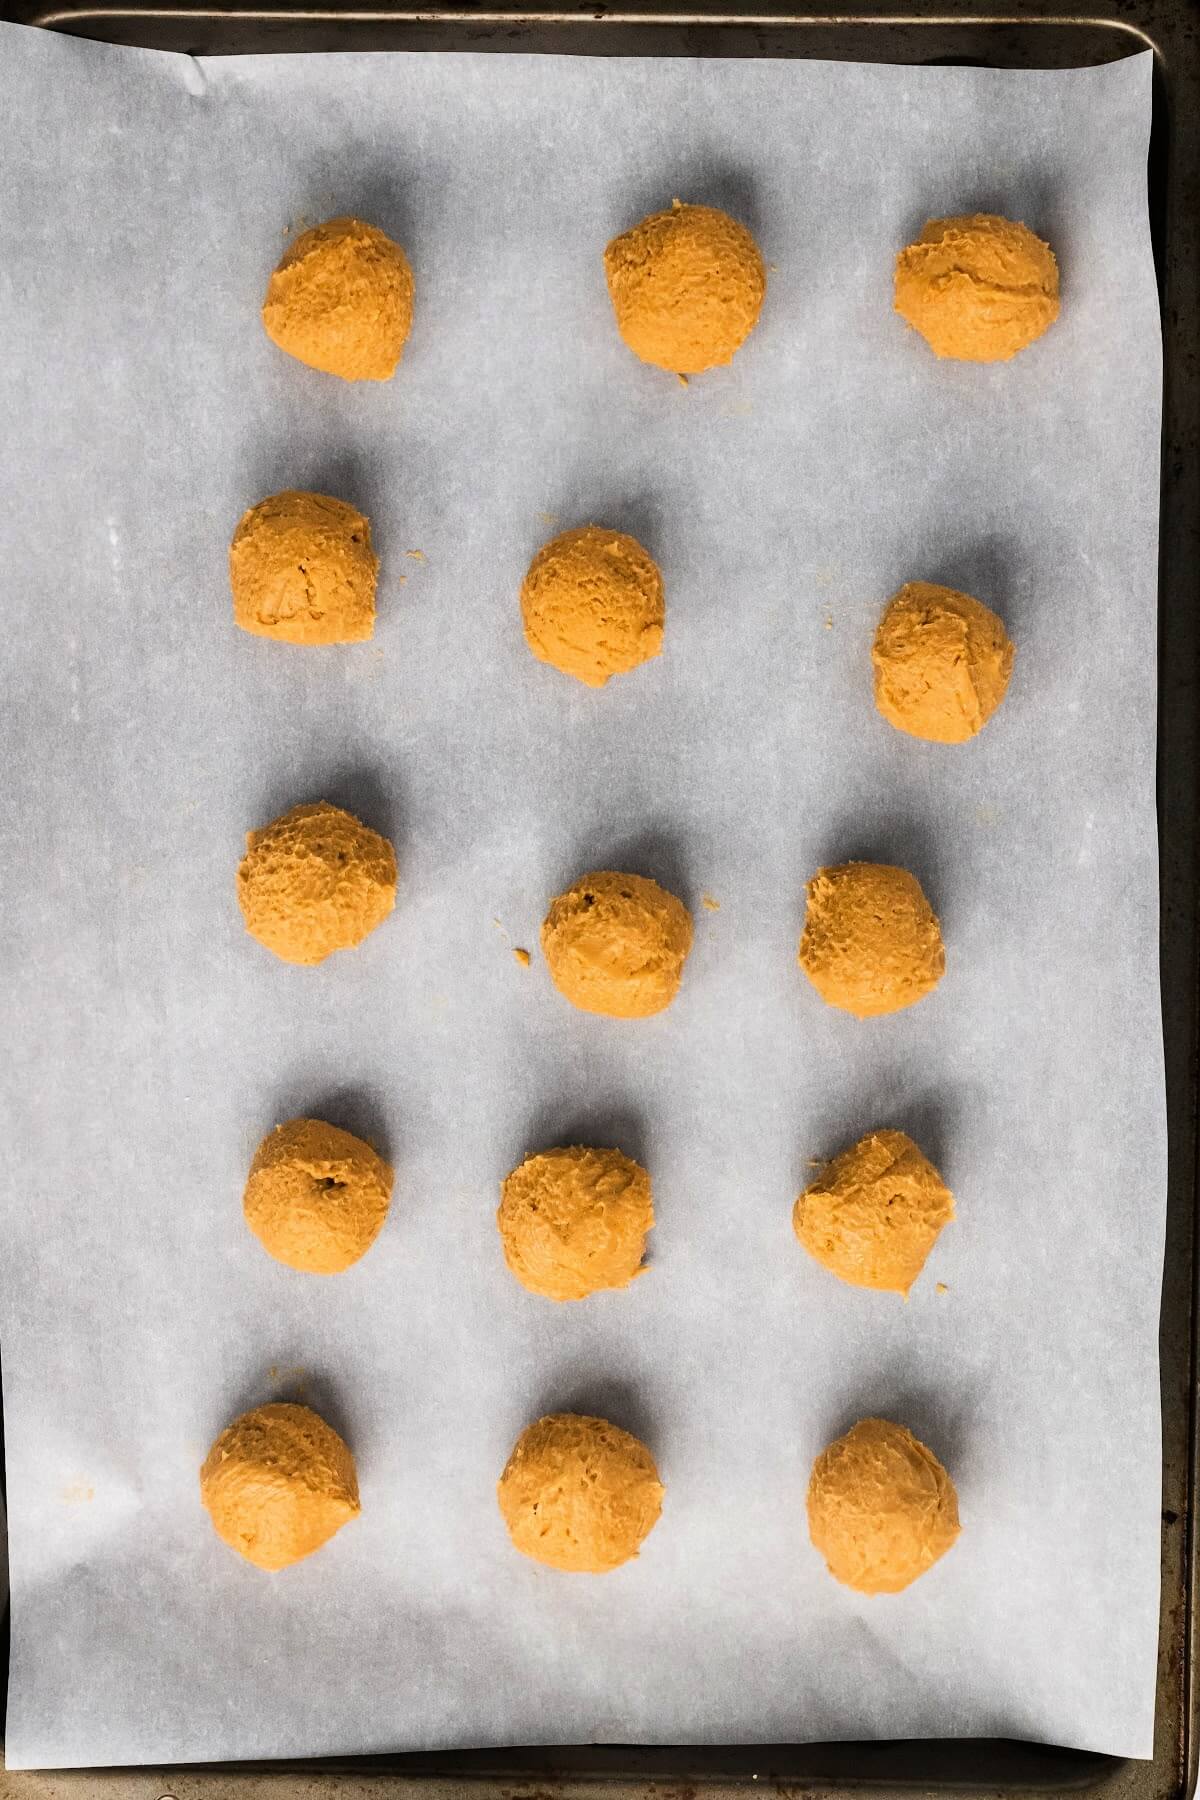 A baking sheet lined with parchment paper with 15 rolled balls of peanut butter truffles.